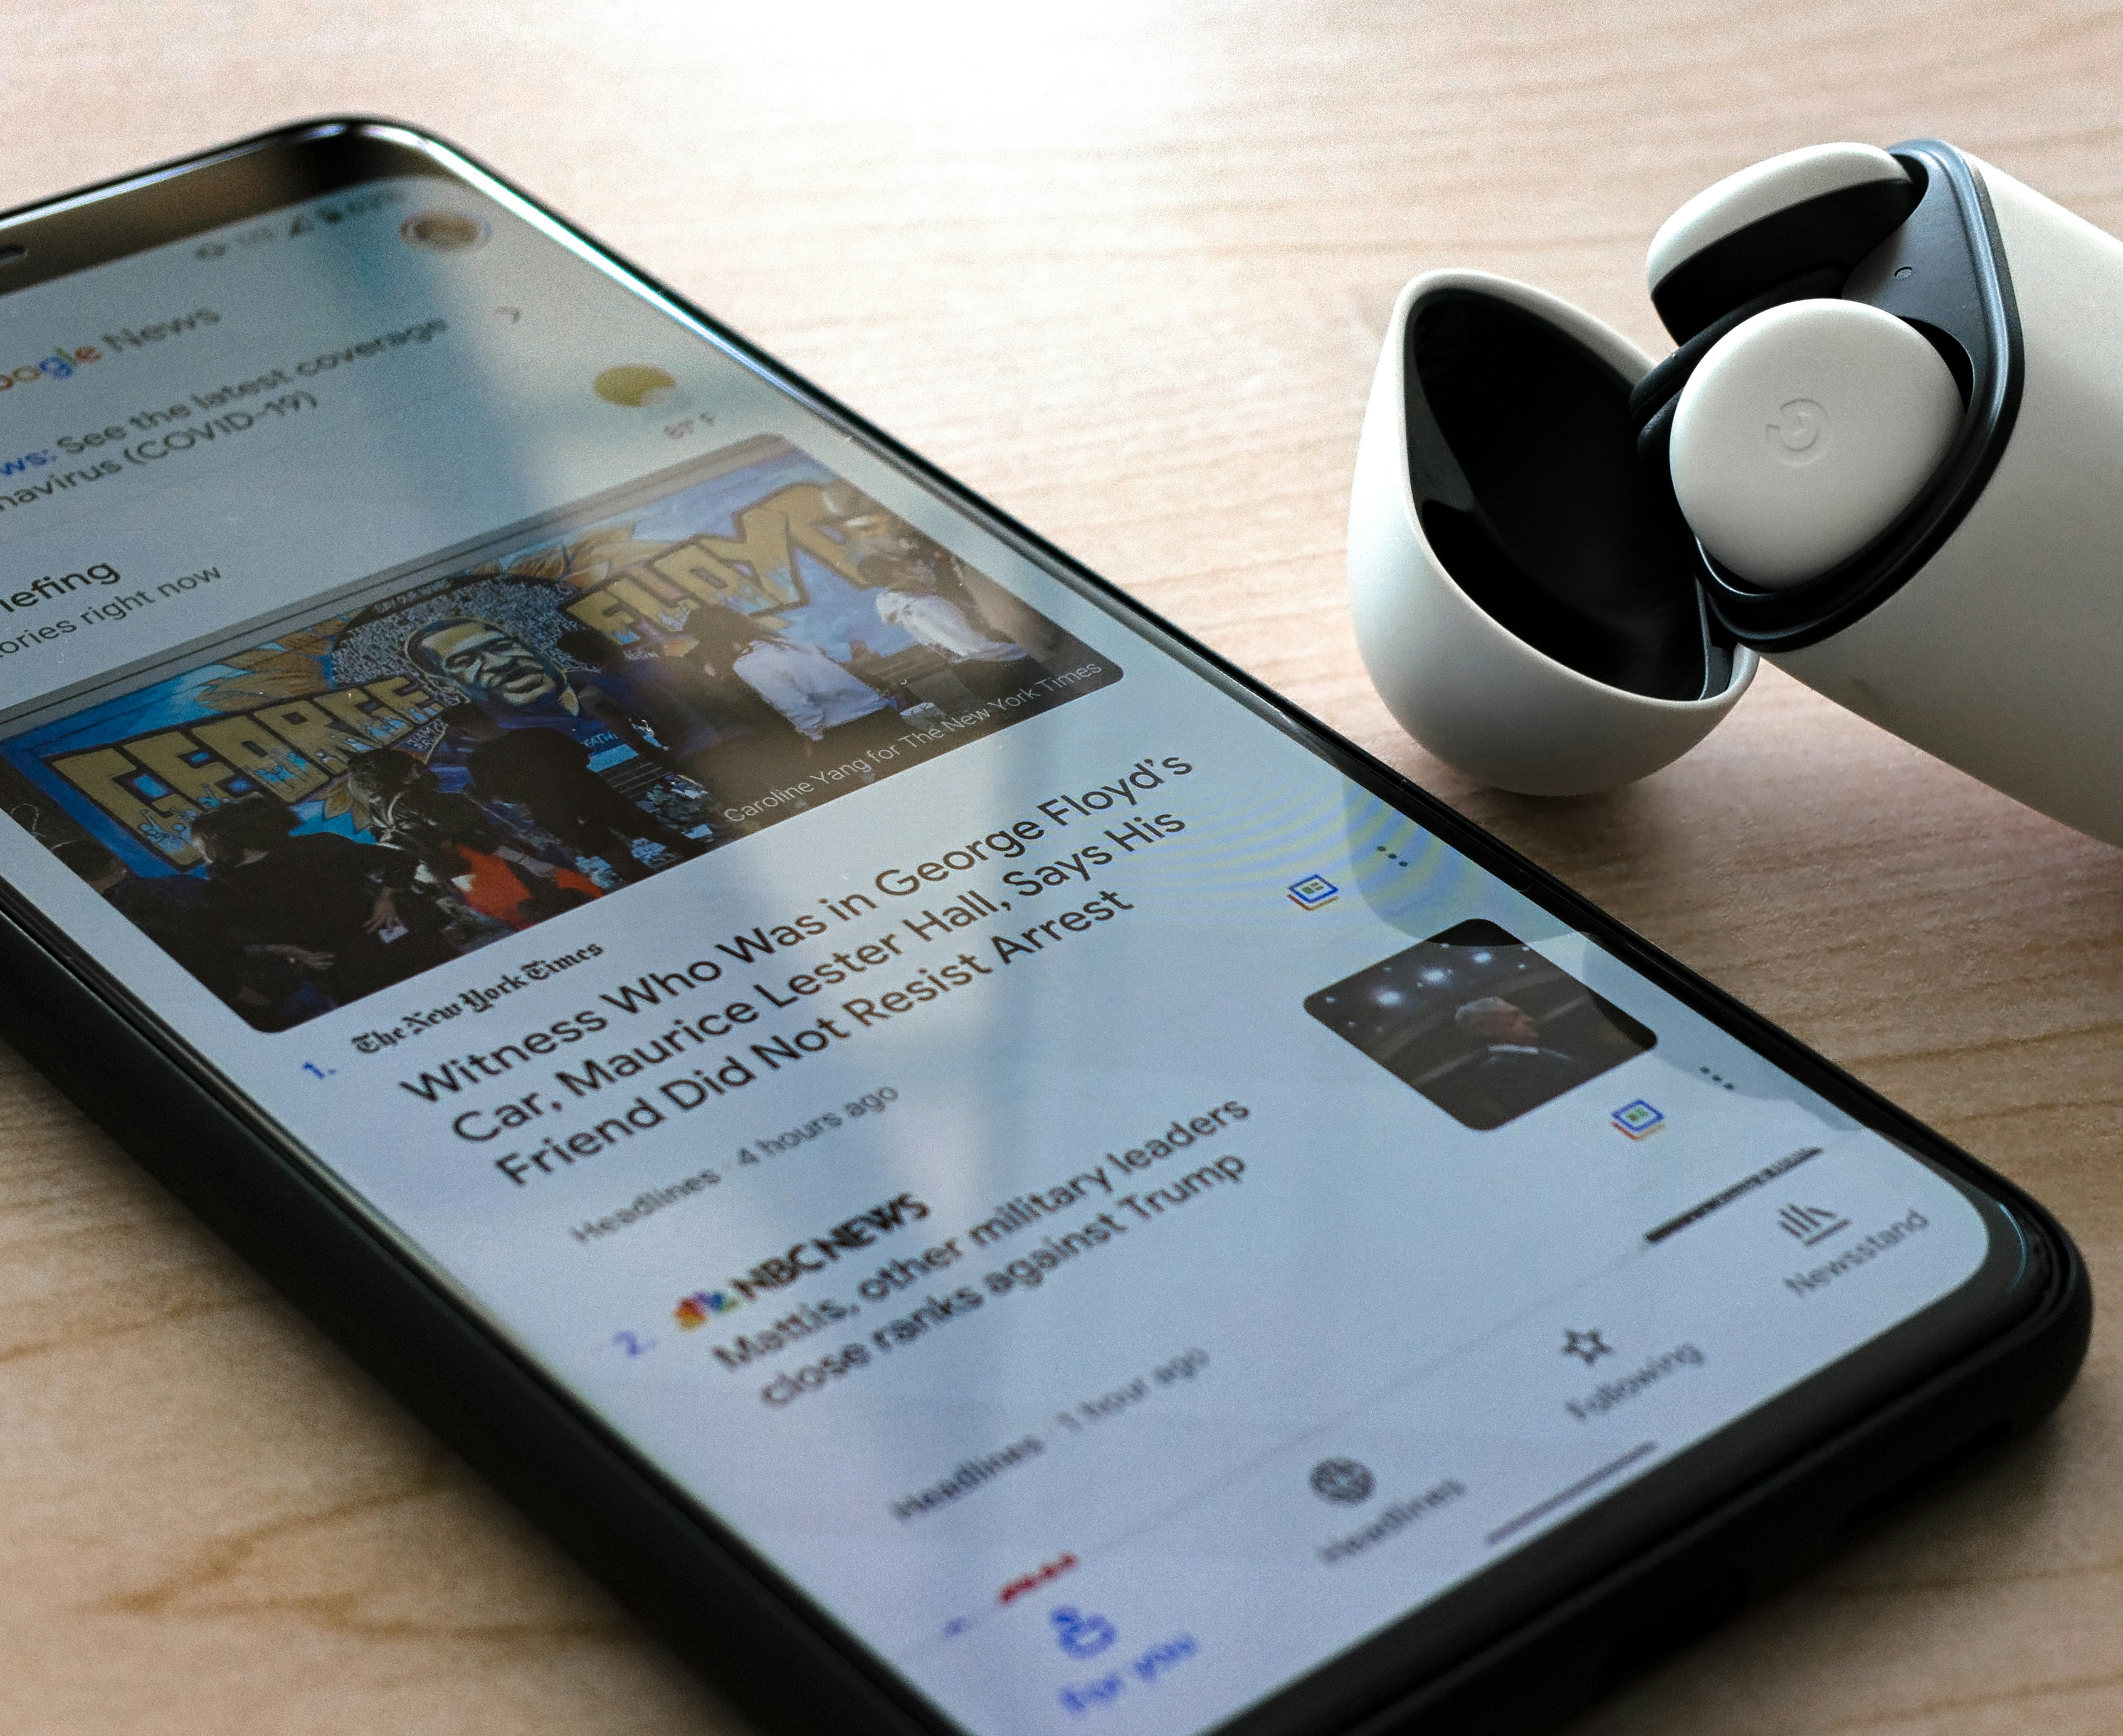 A Google Pixel 4 XL displays news of the Nationwide Protests while resting next to a pair of Pixel Buds

Credit: @upgradeur_life   www.instagram.com/upgradeur_life
